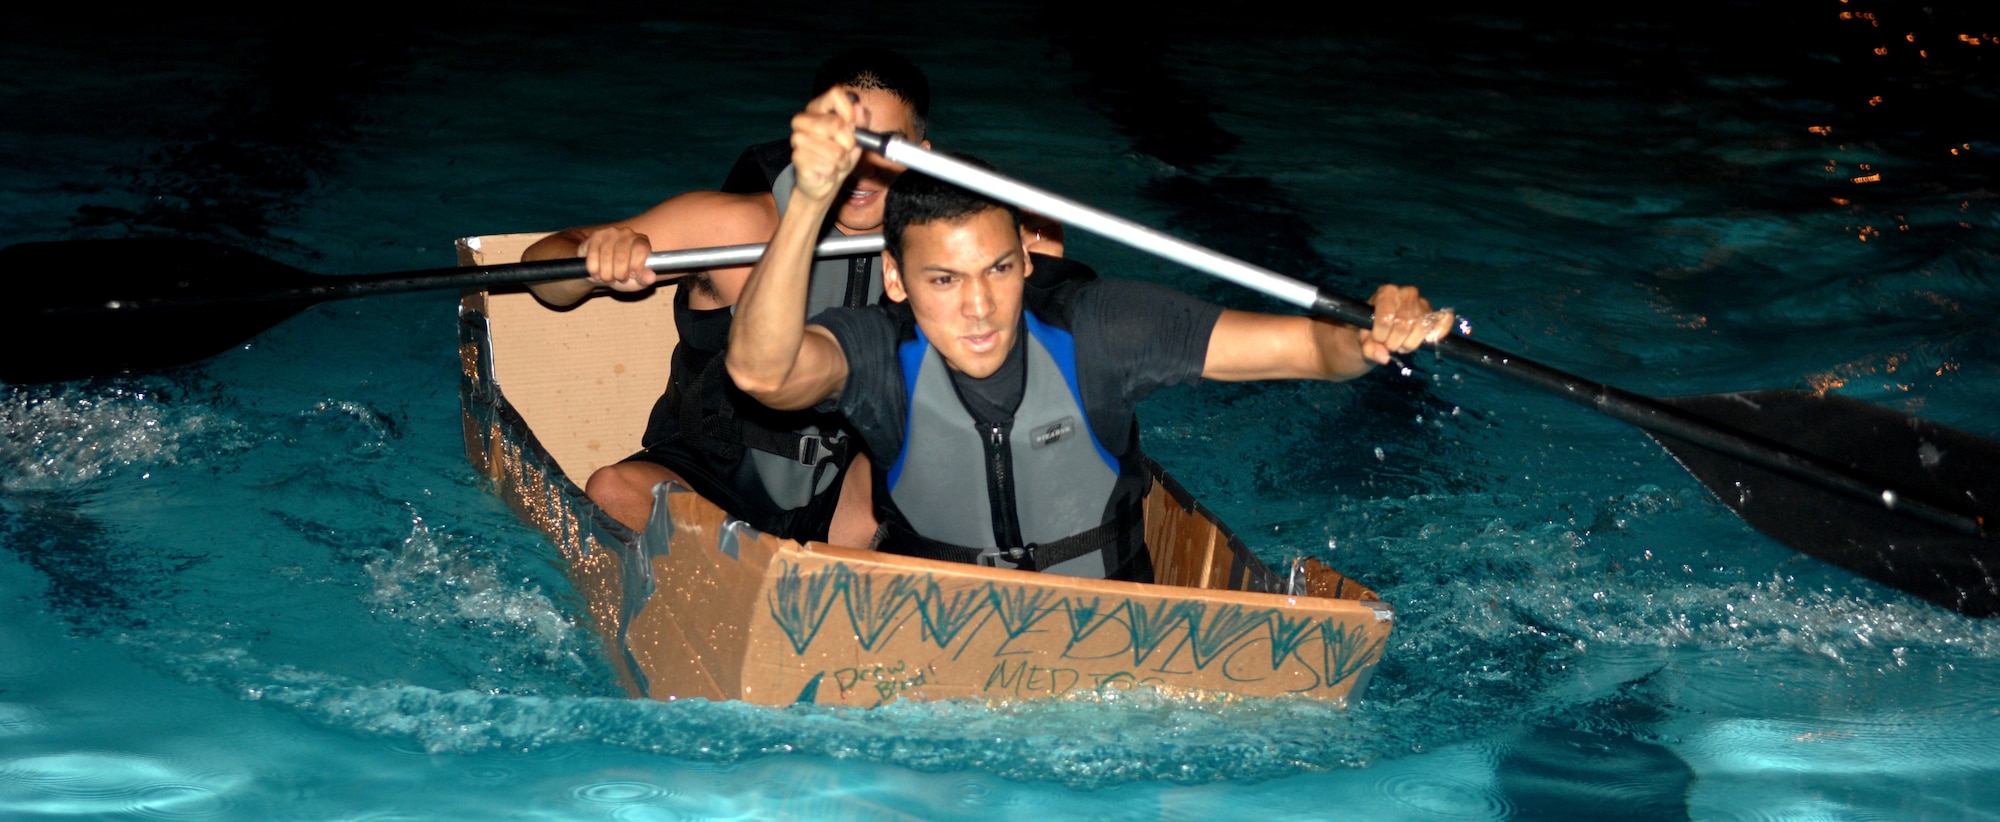 Airman 1st Class Carlos Villegas and Airman 1st Class Broland Johnson from the 4th Medical Operations Squadron paddle vigorously to beat out the other competitors during the Build-a-Boat competition August 1, 2008, Seymour Johnson Air Force Base, North Carolina. The Build-a-Boat competition's purpose is to boost morale and help Airman meet other Airman. (U.S. Air Force photo by Airman 1st Class Gino Reyes)